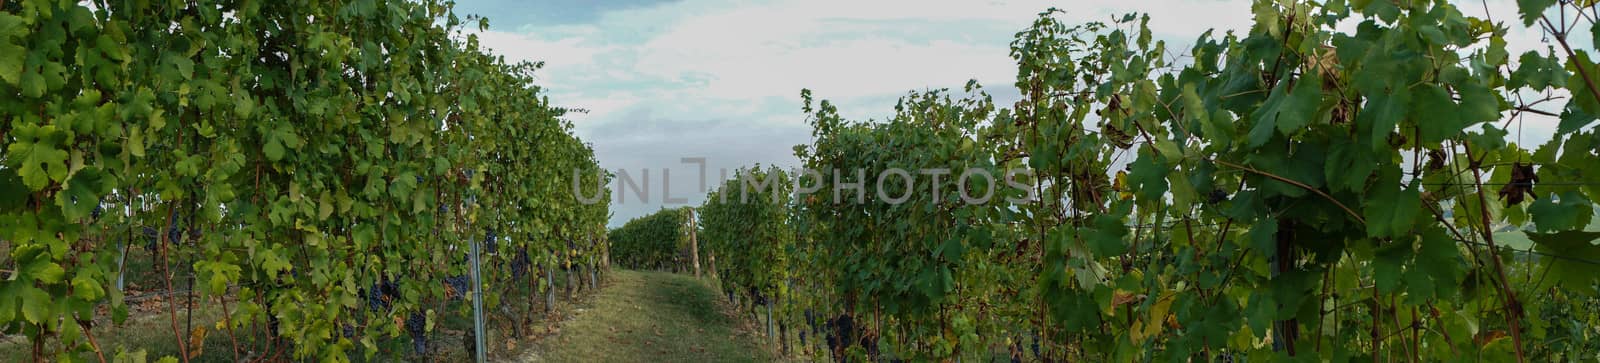 Grapes and vineyards by cosca